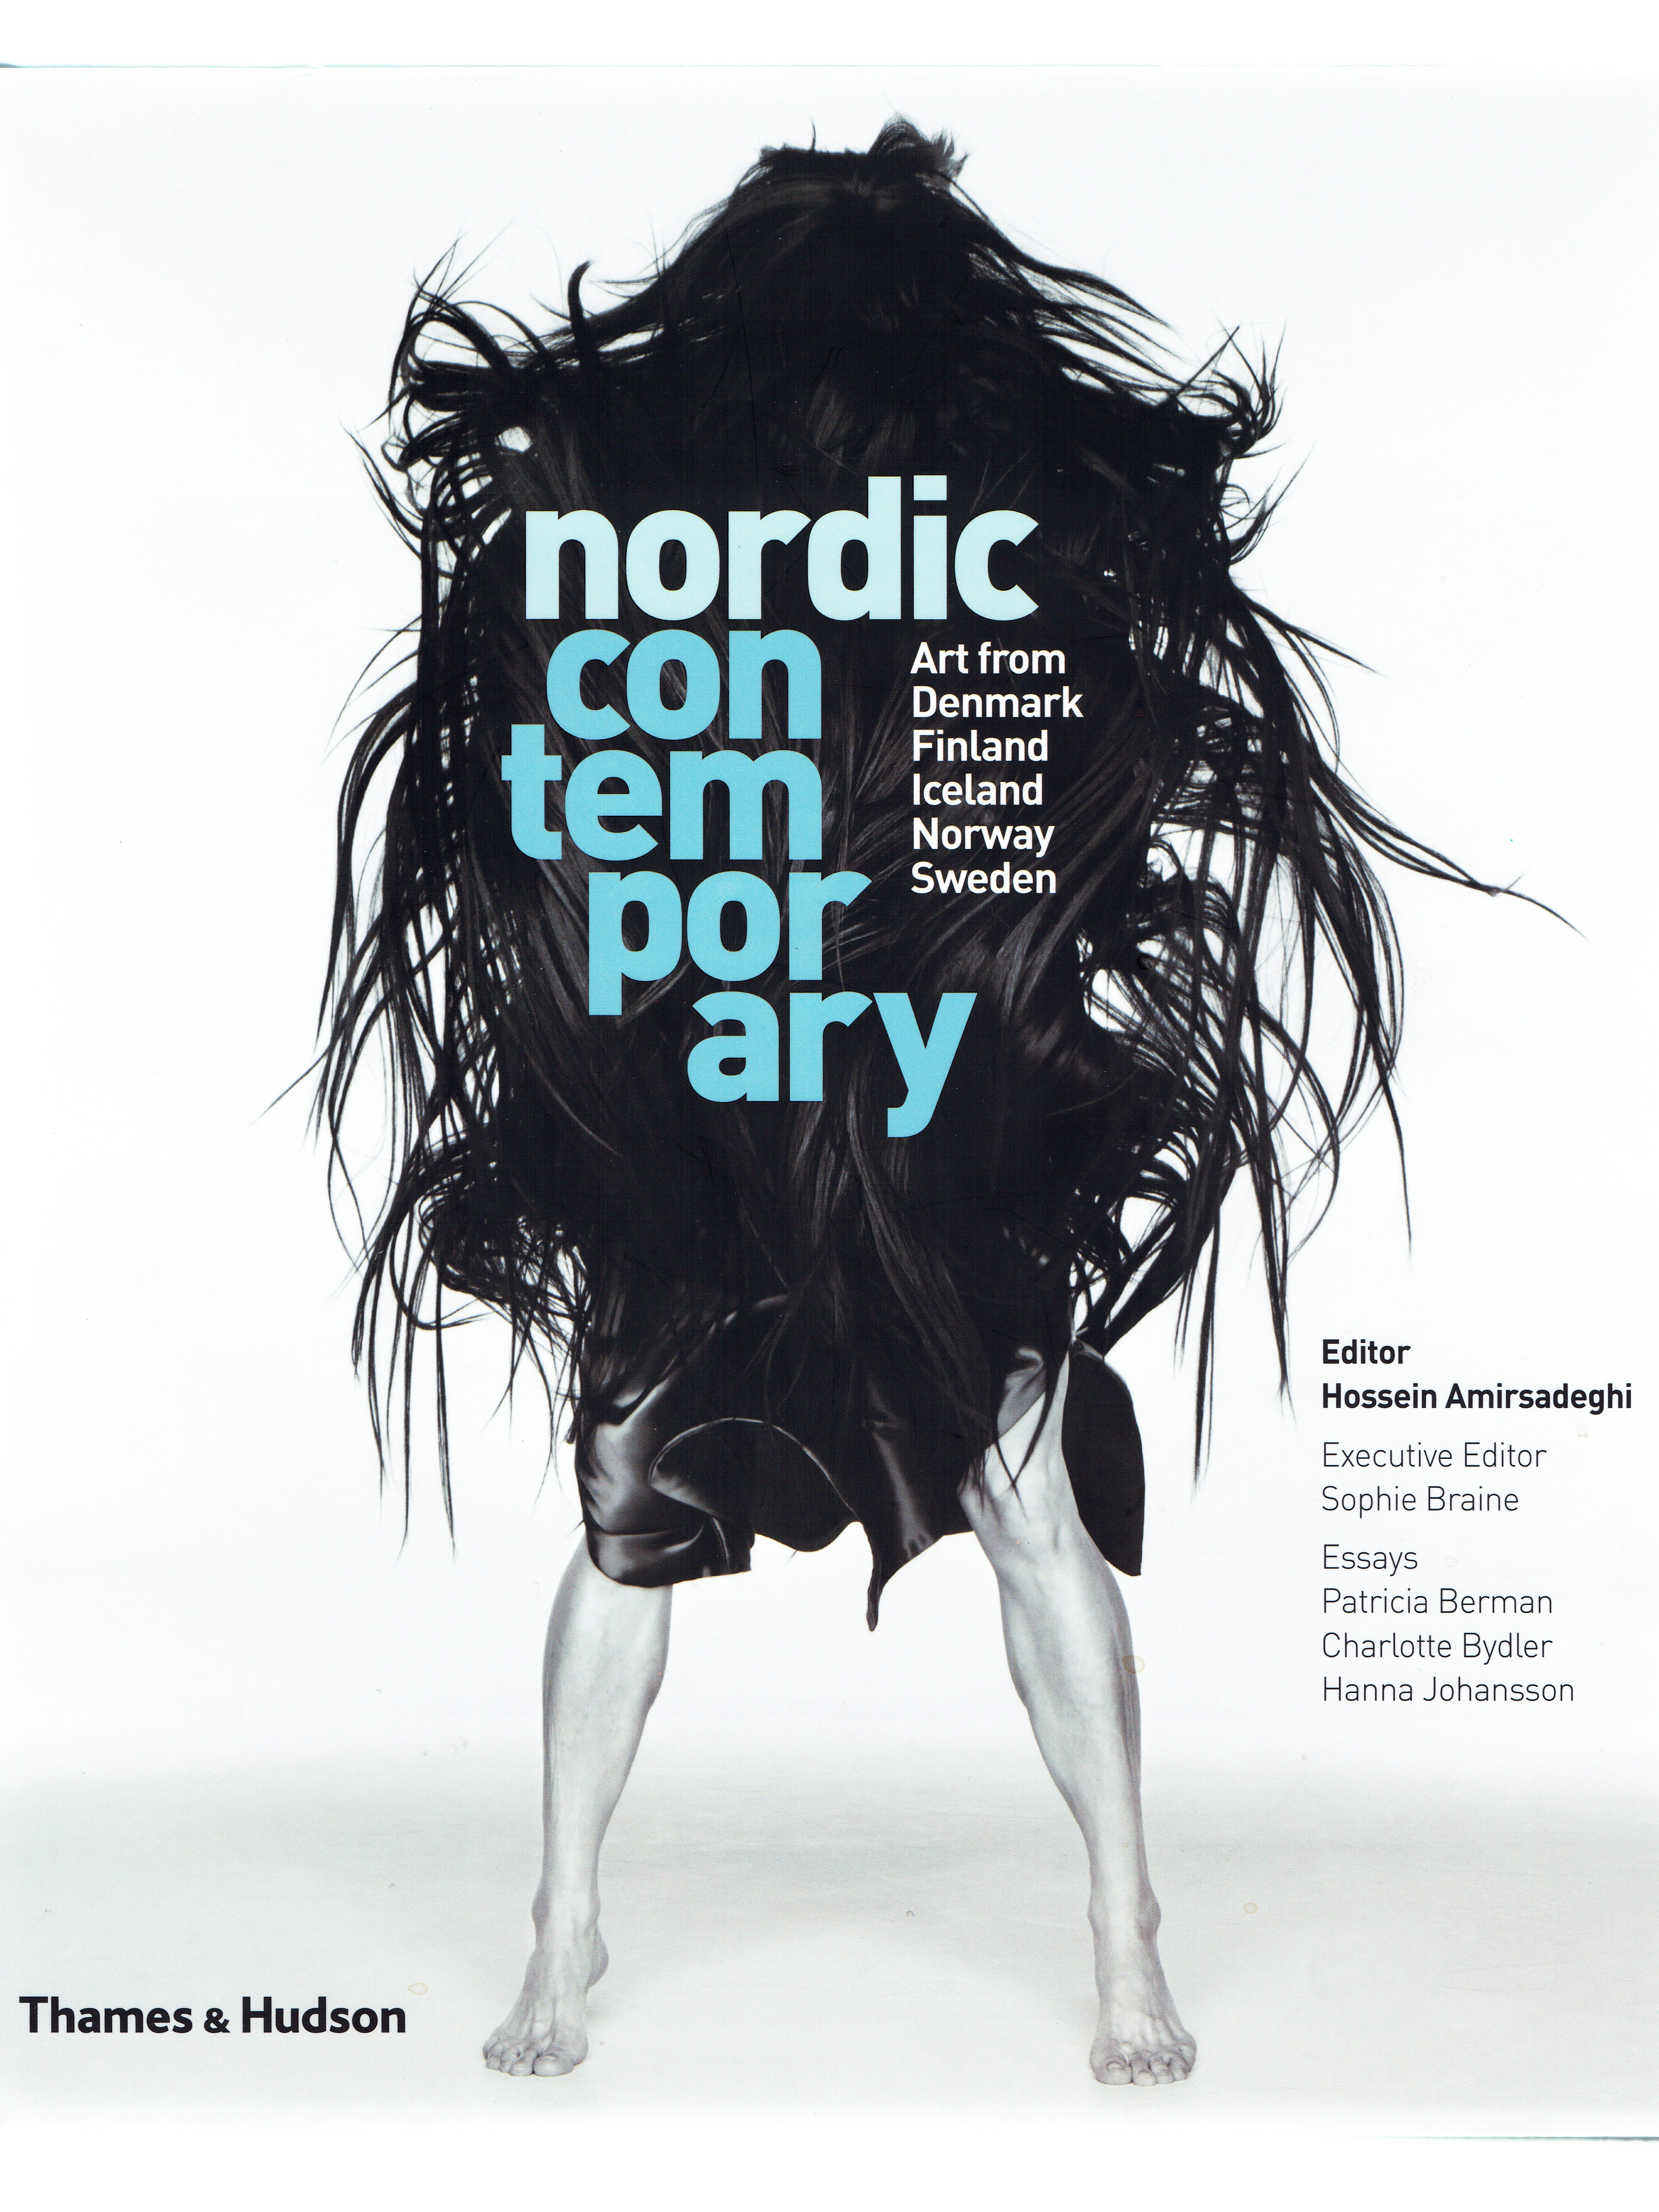 Nordic Contemporary Art by TransGlobe Publishing, Ltd. and Thames & Hudson, 2015